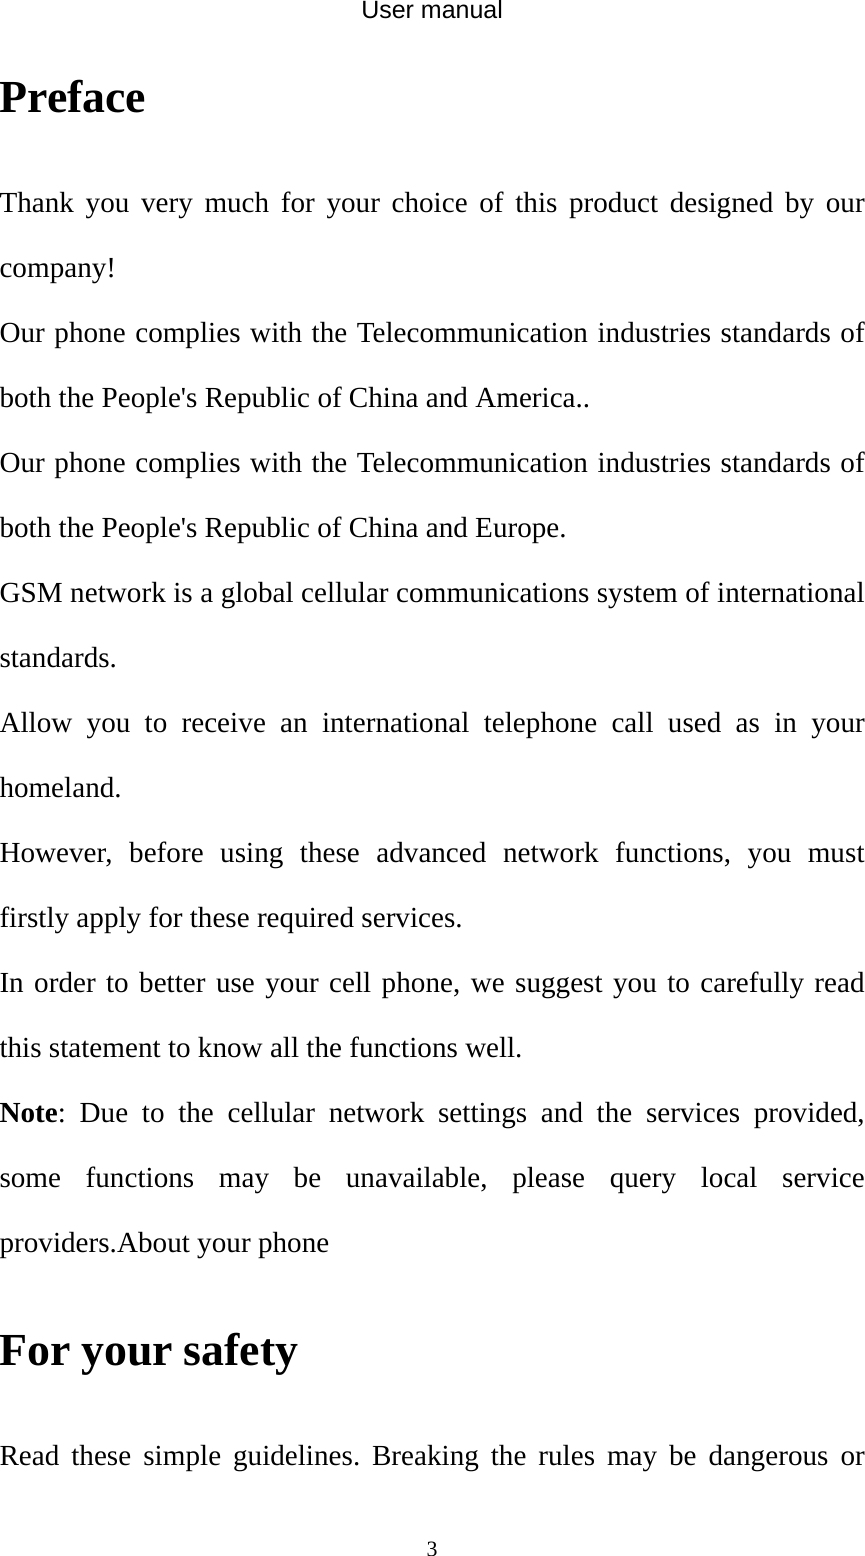 User manual  3Preface  Thank you very much for your choice of this product designed by our company! Our phone complies with the Telecommunication industries standards of both the People&apos;s Republic of China and America.. Our phone complies with the Telecommunication industries standards of both the People&apos;s Republic of China and Europe. GSM network is a global cellular communications system of international standards.  Allow you to receive an international telephone call used as in your homeland. However, before using these advanced network functions, you must firstly apply for these required services. In order to better use your cell phone, we suggest you to carefully read this statement to know all the functions well. Note: Due to the cellular network settings and the services provided, some functions may be unavailable, please query local service providers.About your phone   For your safety Read these simple guidelines. Breaking the rules may be dangerous or 